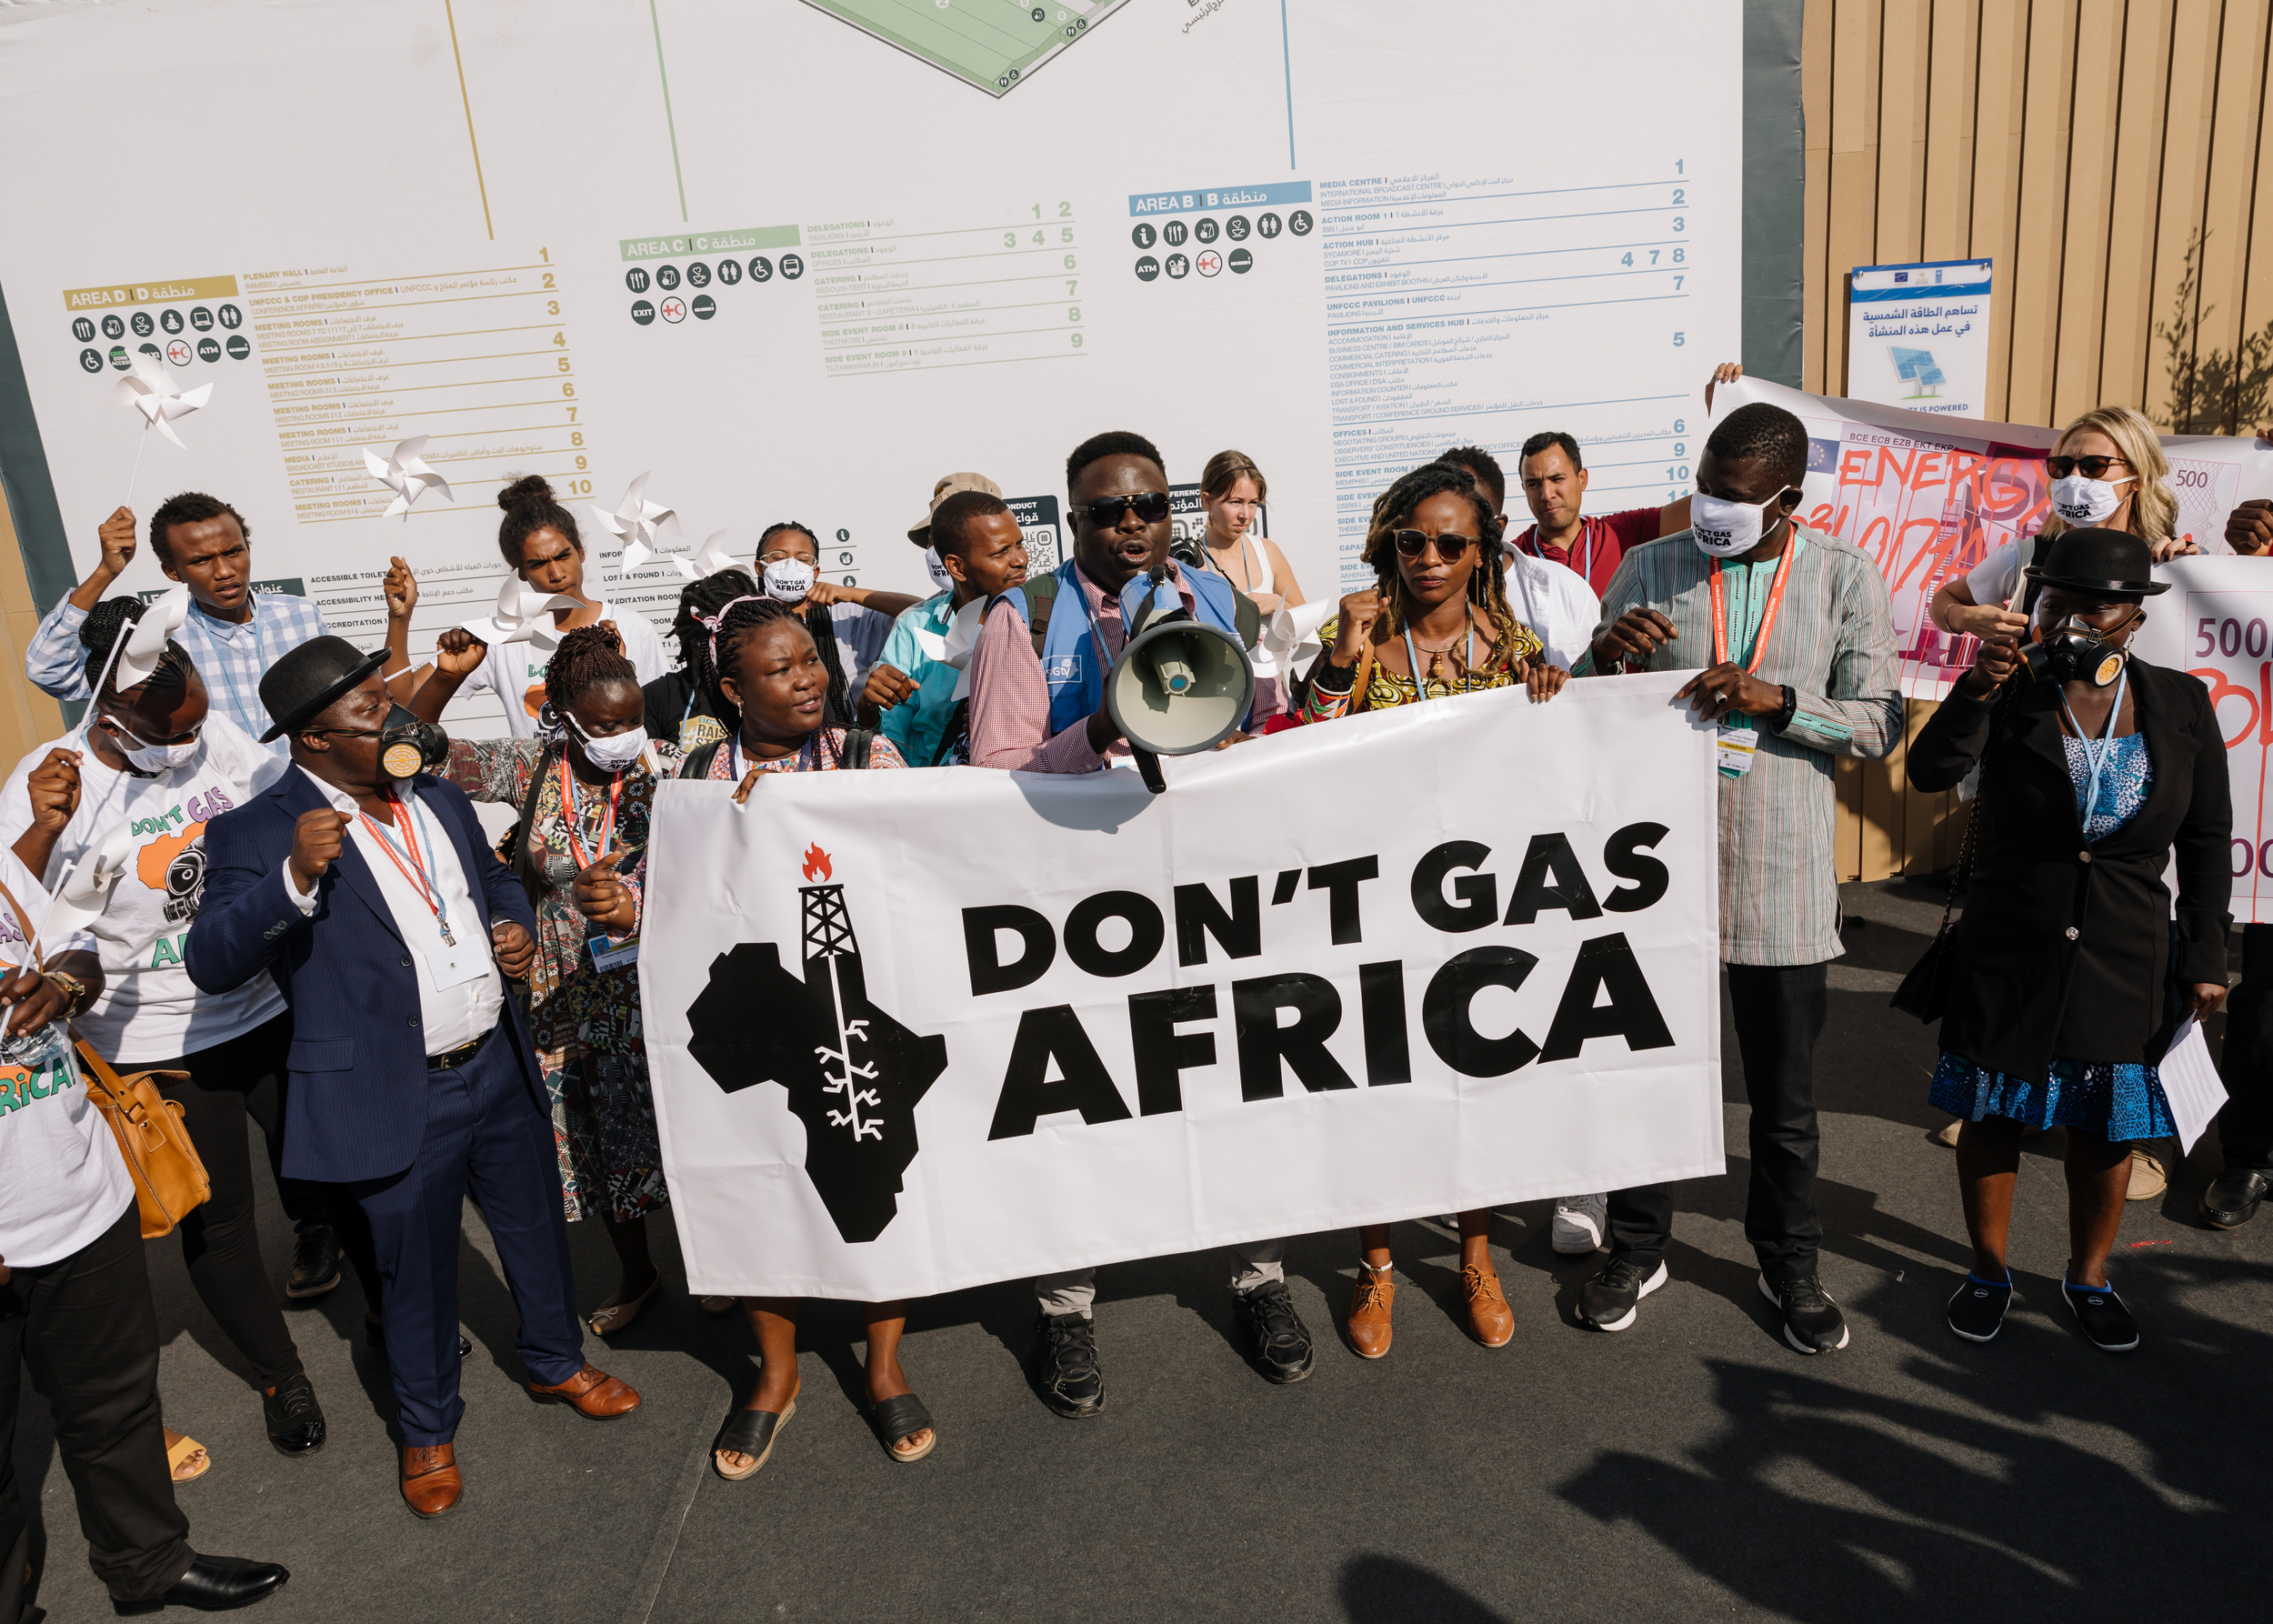 Campaigners call for an end to fossil-fuel-induced energy apartheid in Africa